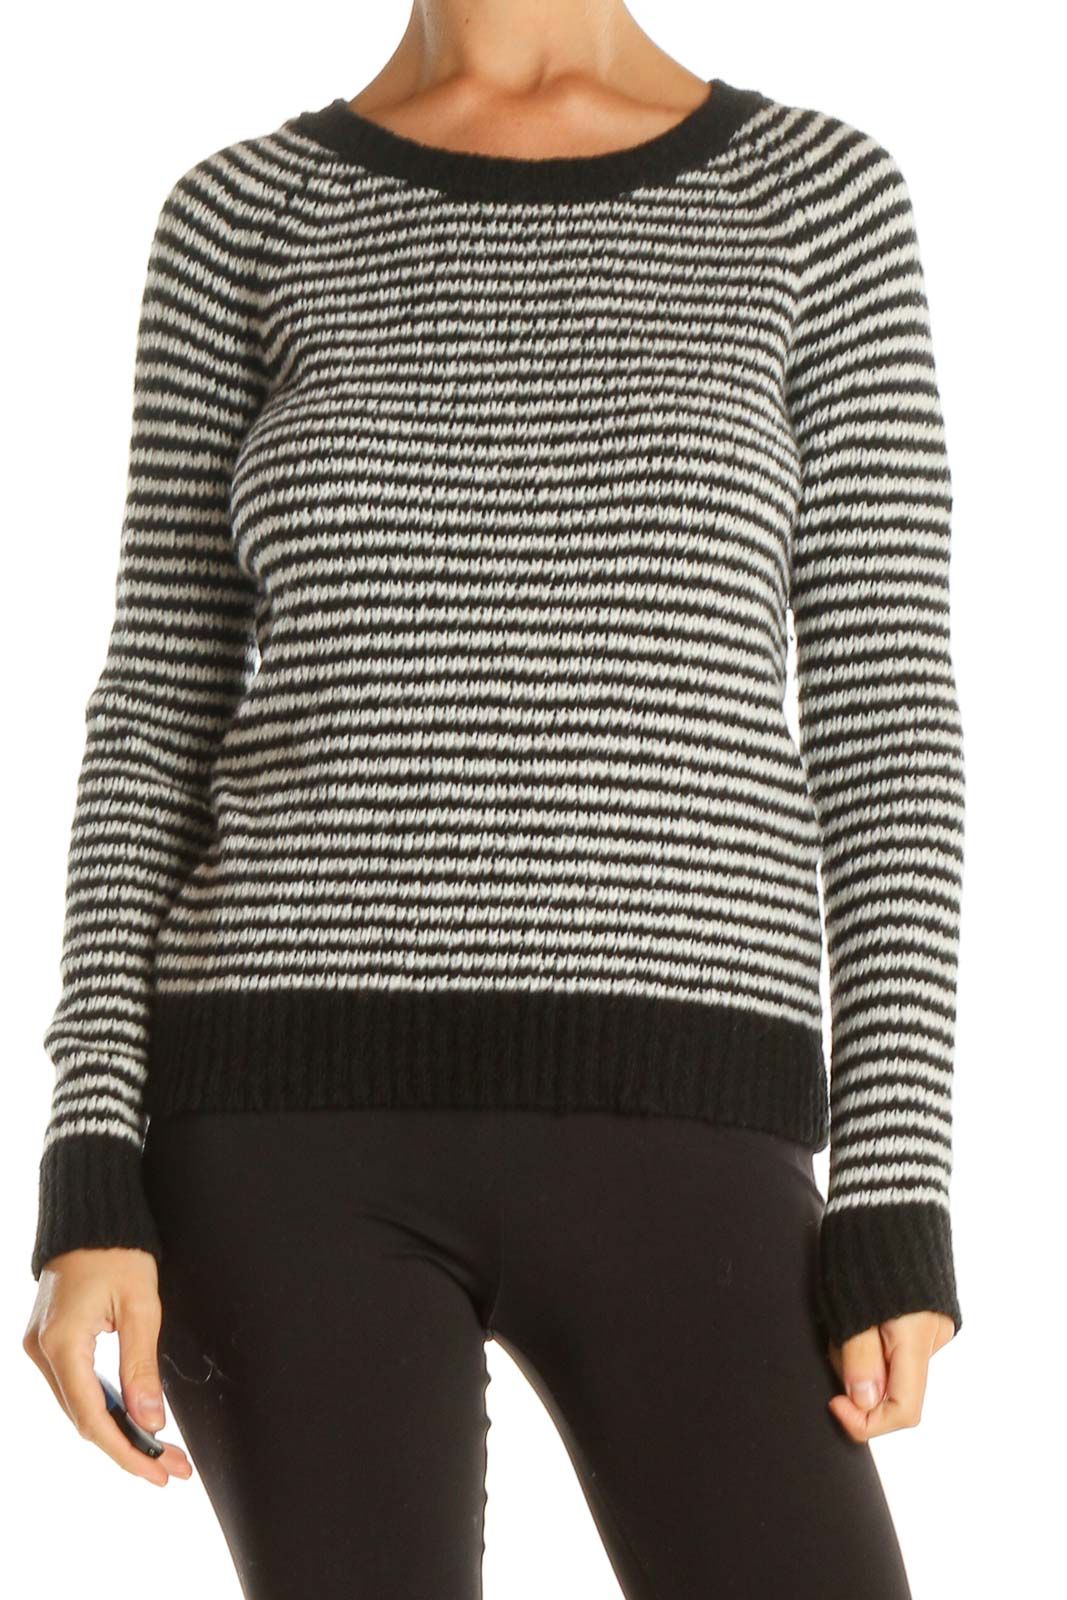 Black White Striped Casual Sweater Front